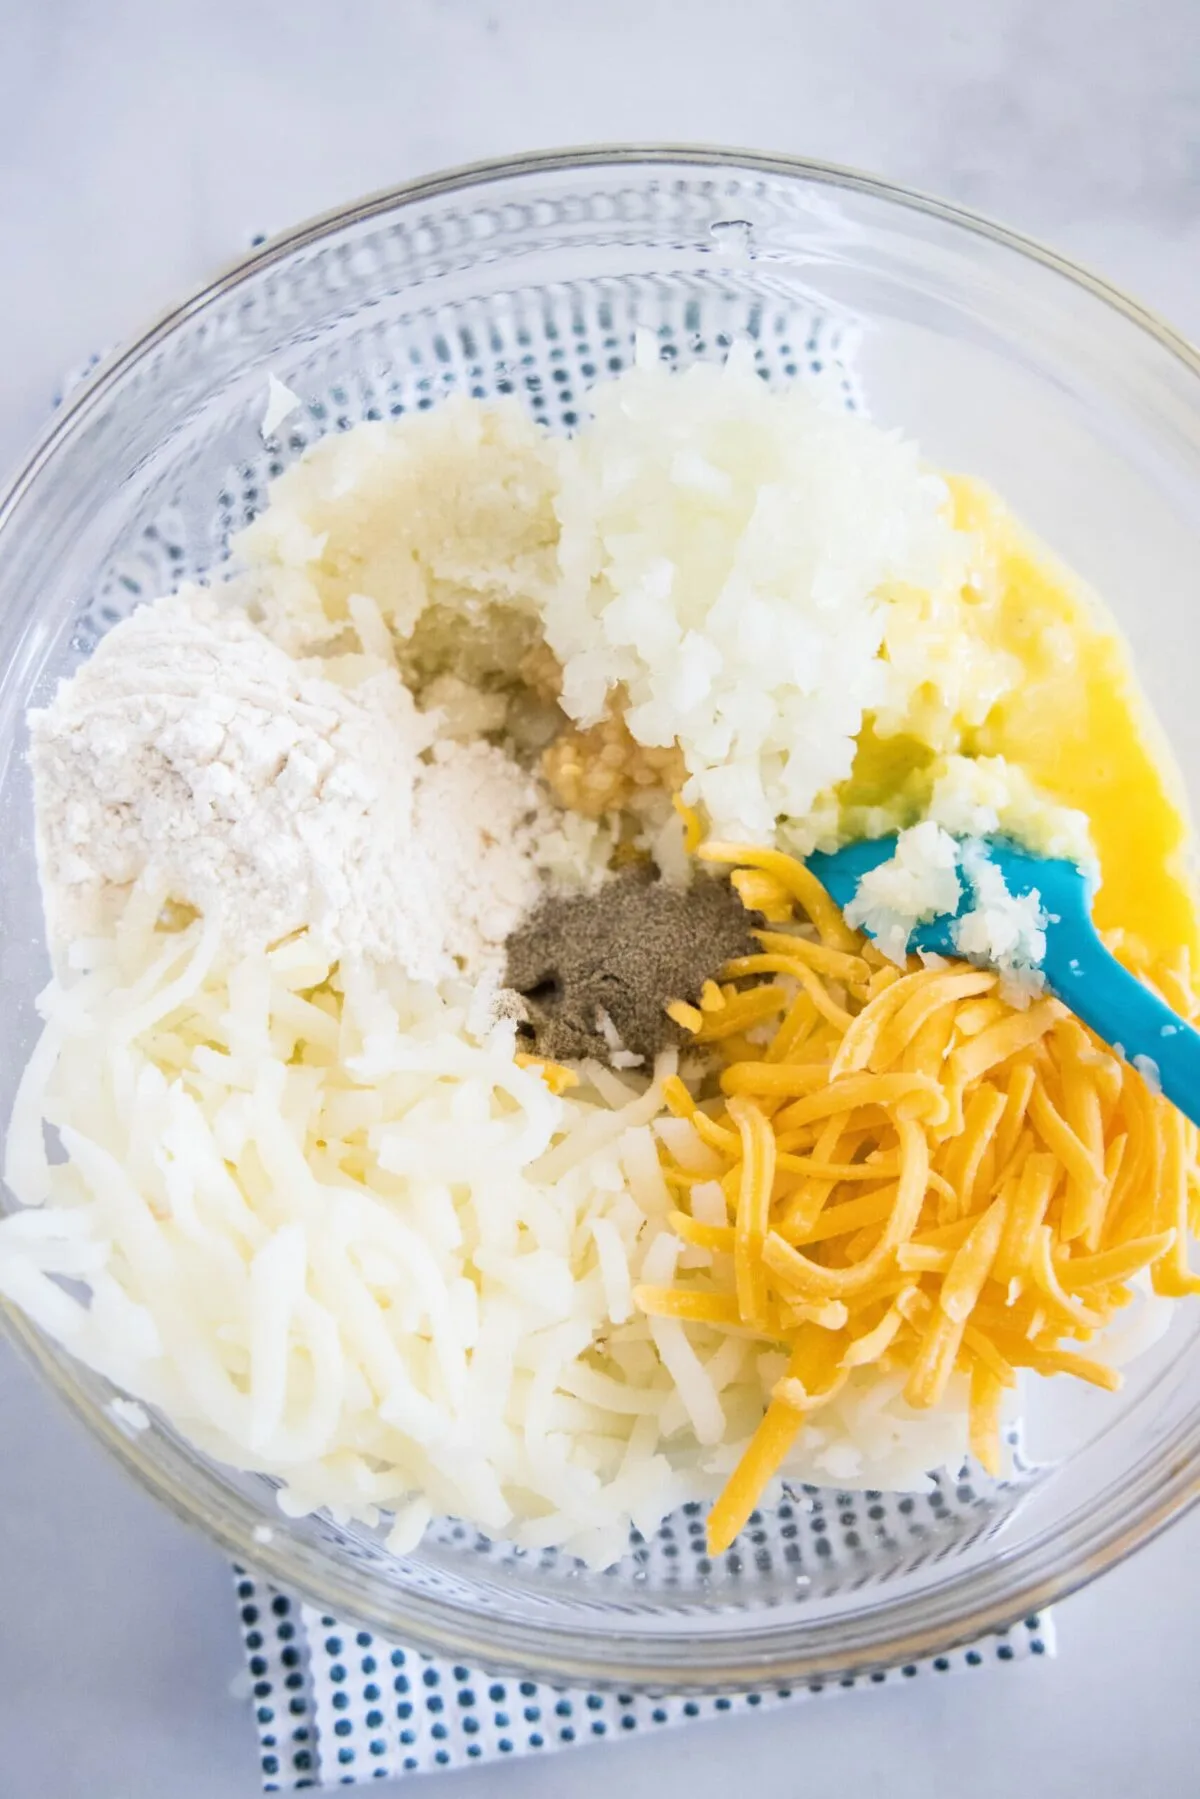 A mixing bowl with mashed cauliflower, shredded hash browns, grated cheese, onion, garlic, salt, pepper, an egg, and a rubber spatula